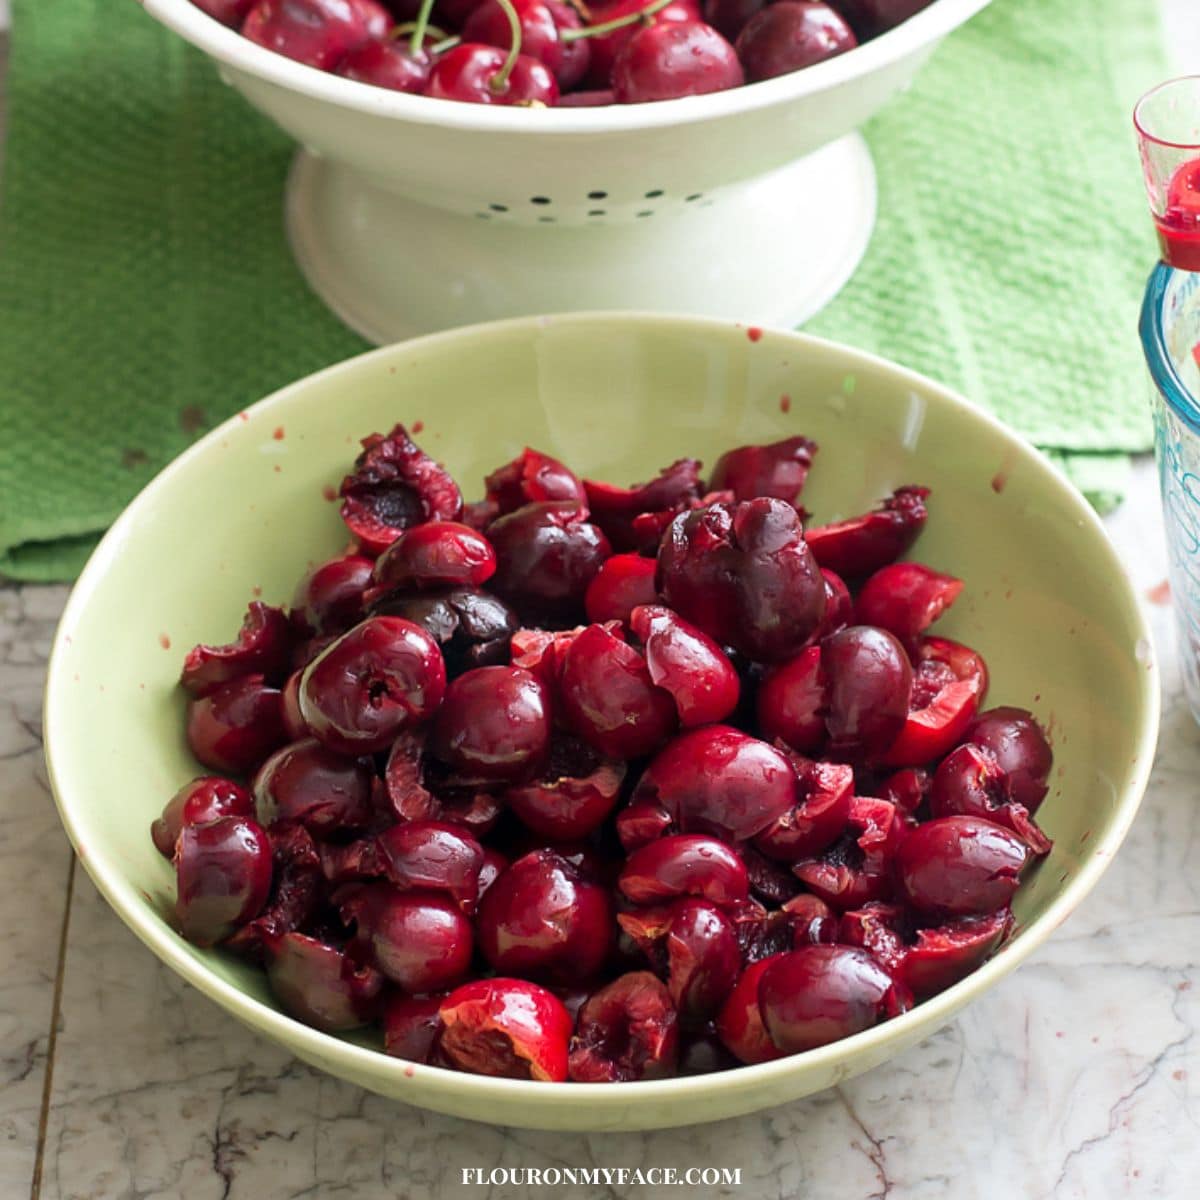 A bowl filled with pitted cherries.